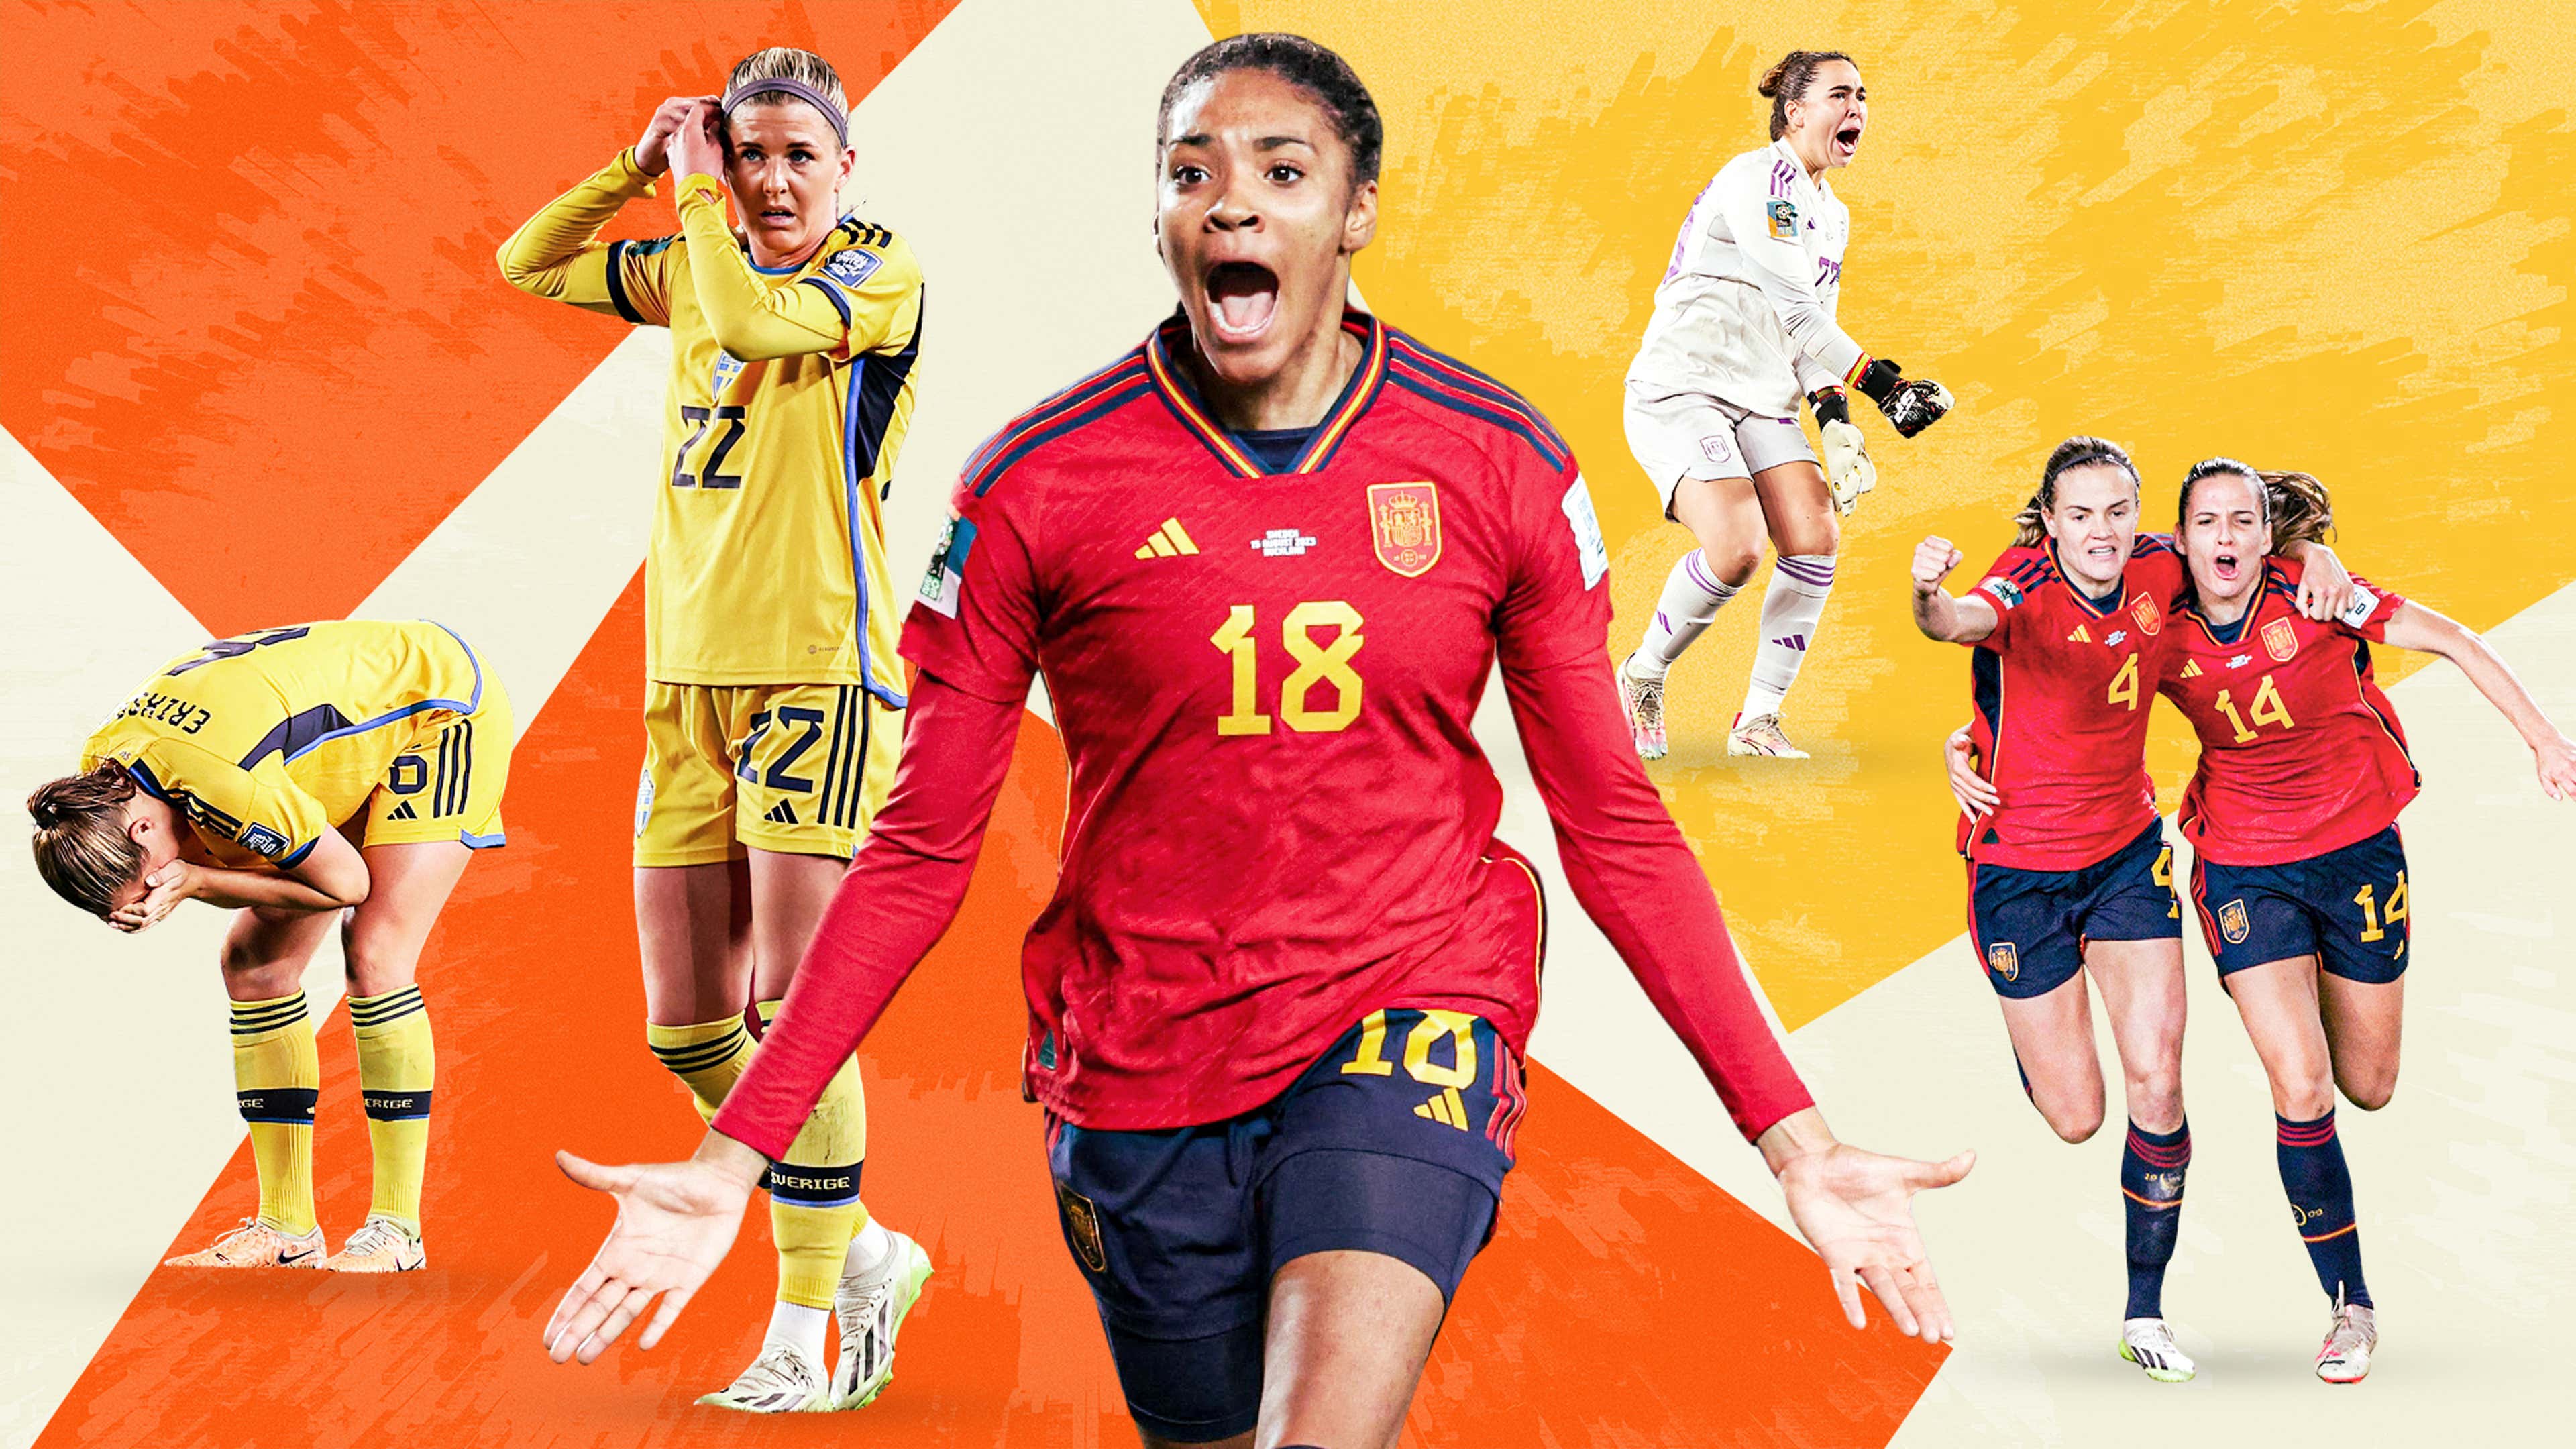 Salma Paralluelo is already superstar! Winners & losers as Spain